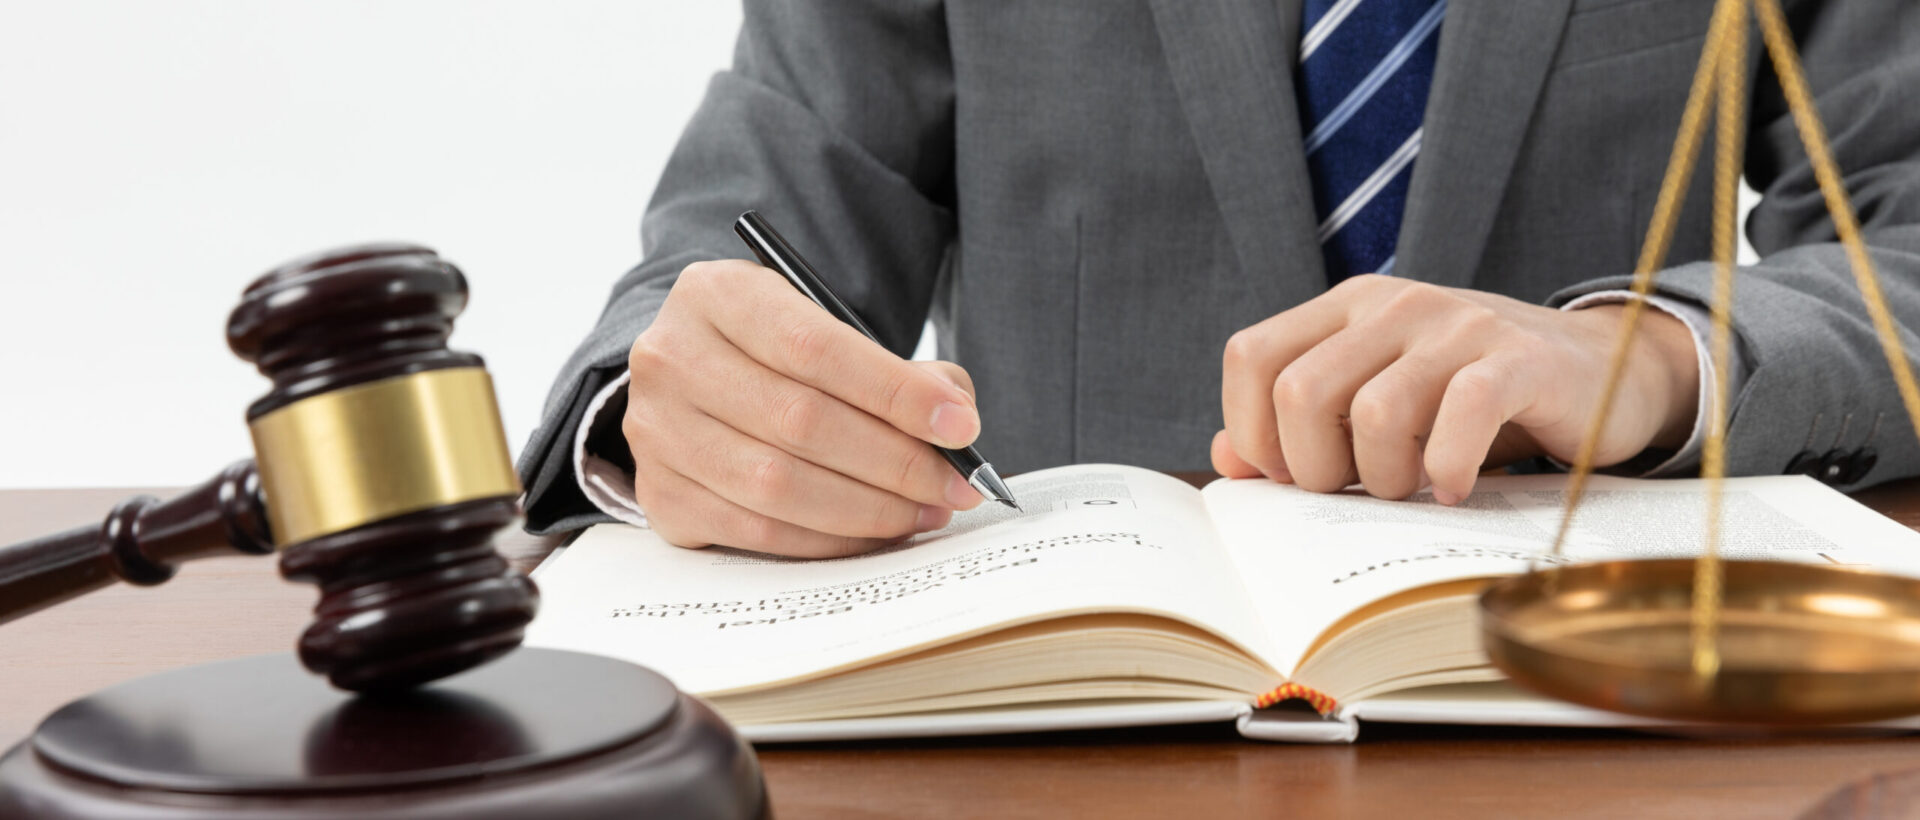 closeup-shot-person-writing-book-with-gavel-table